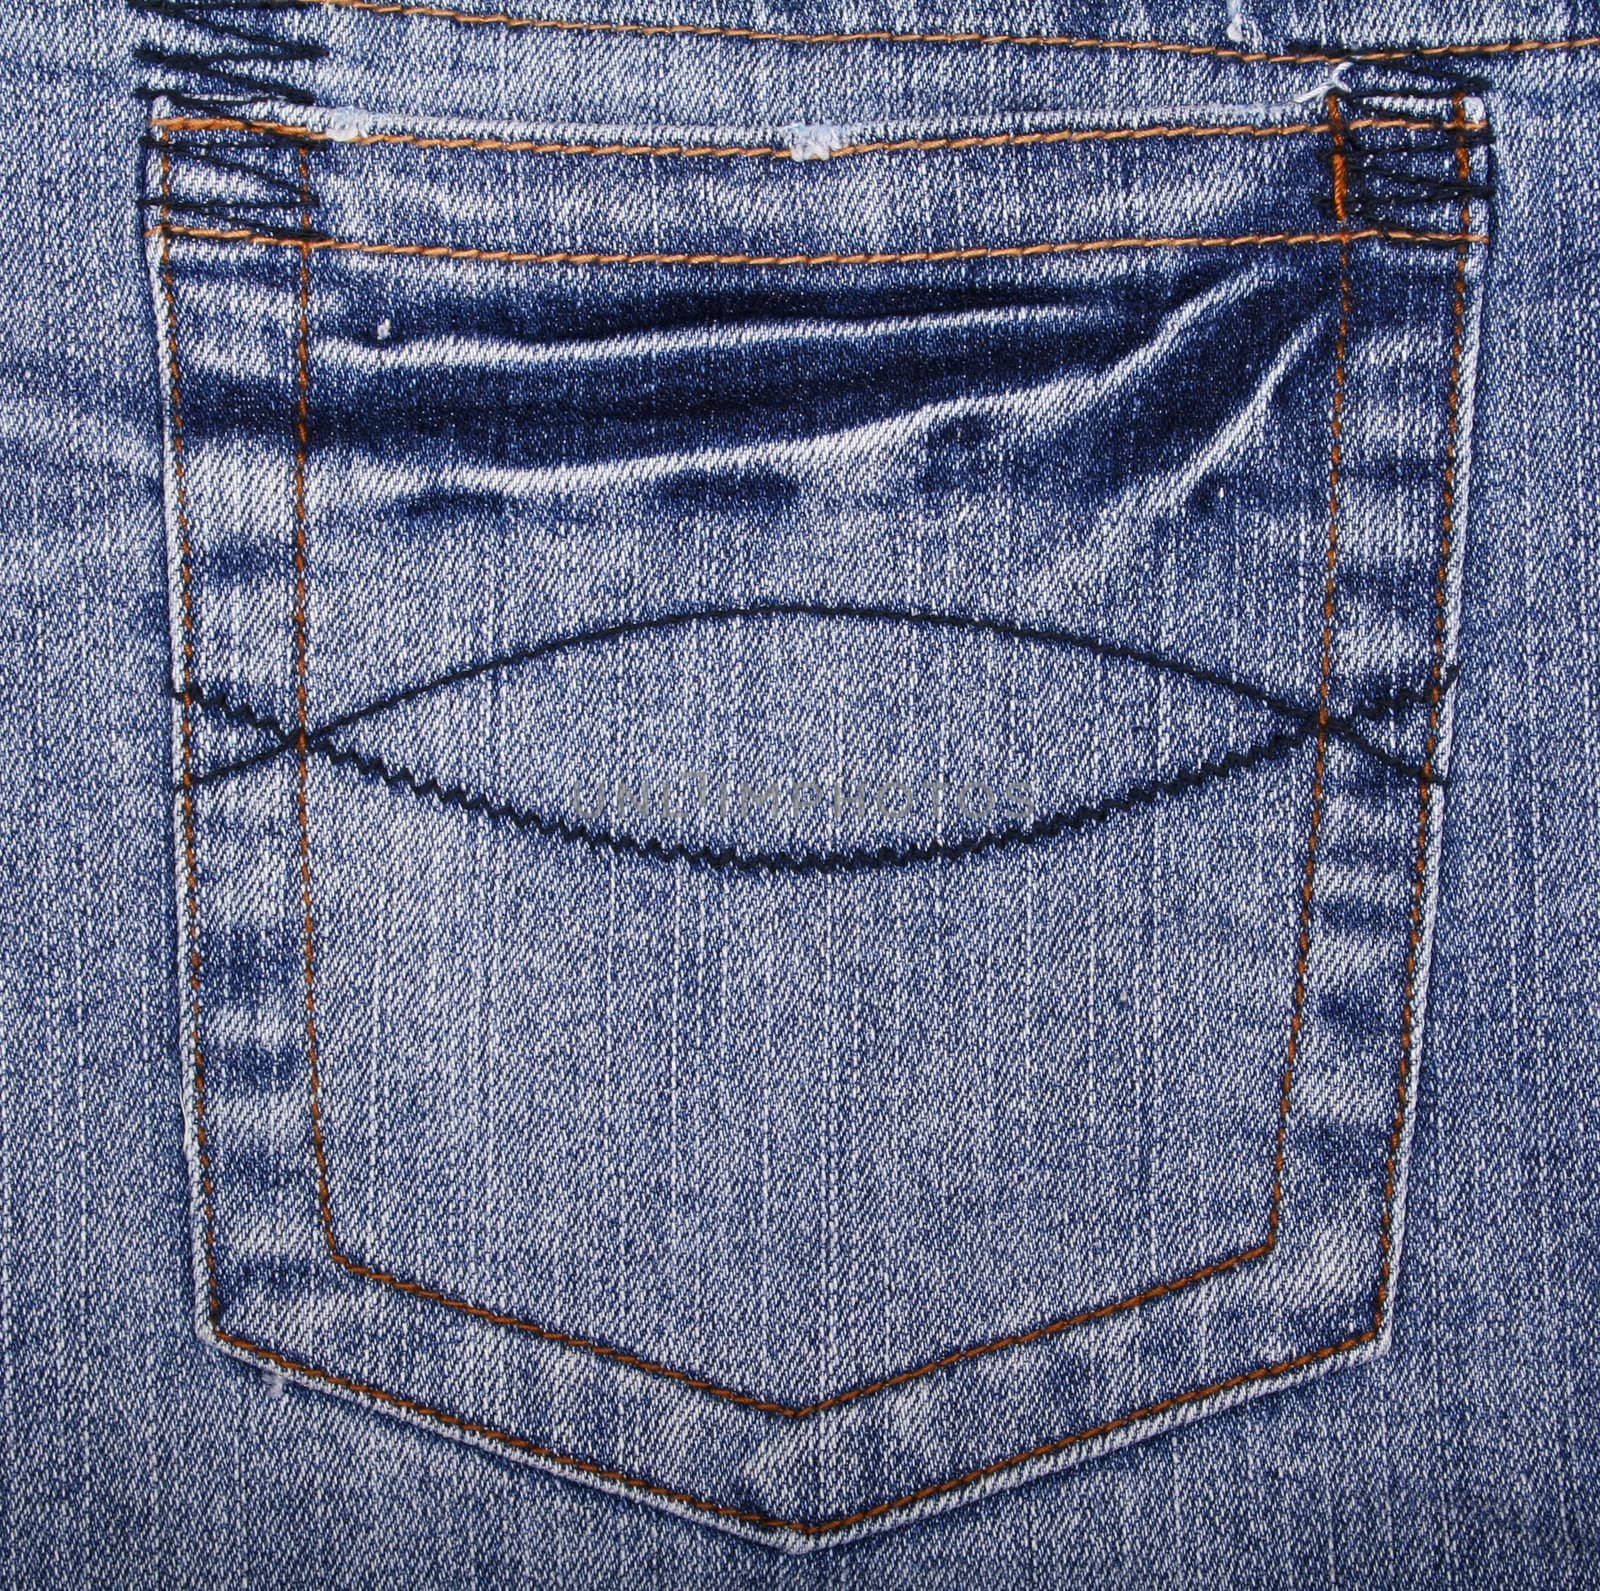 Blue jeans fabric with pocket can use as background 